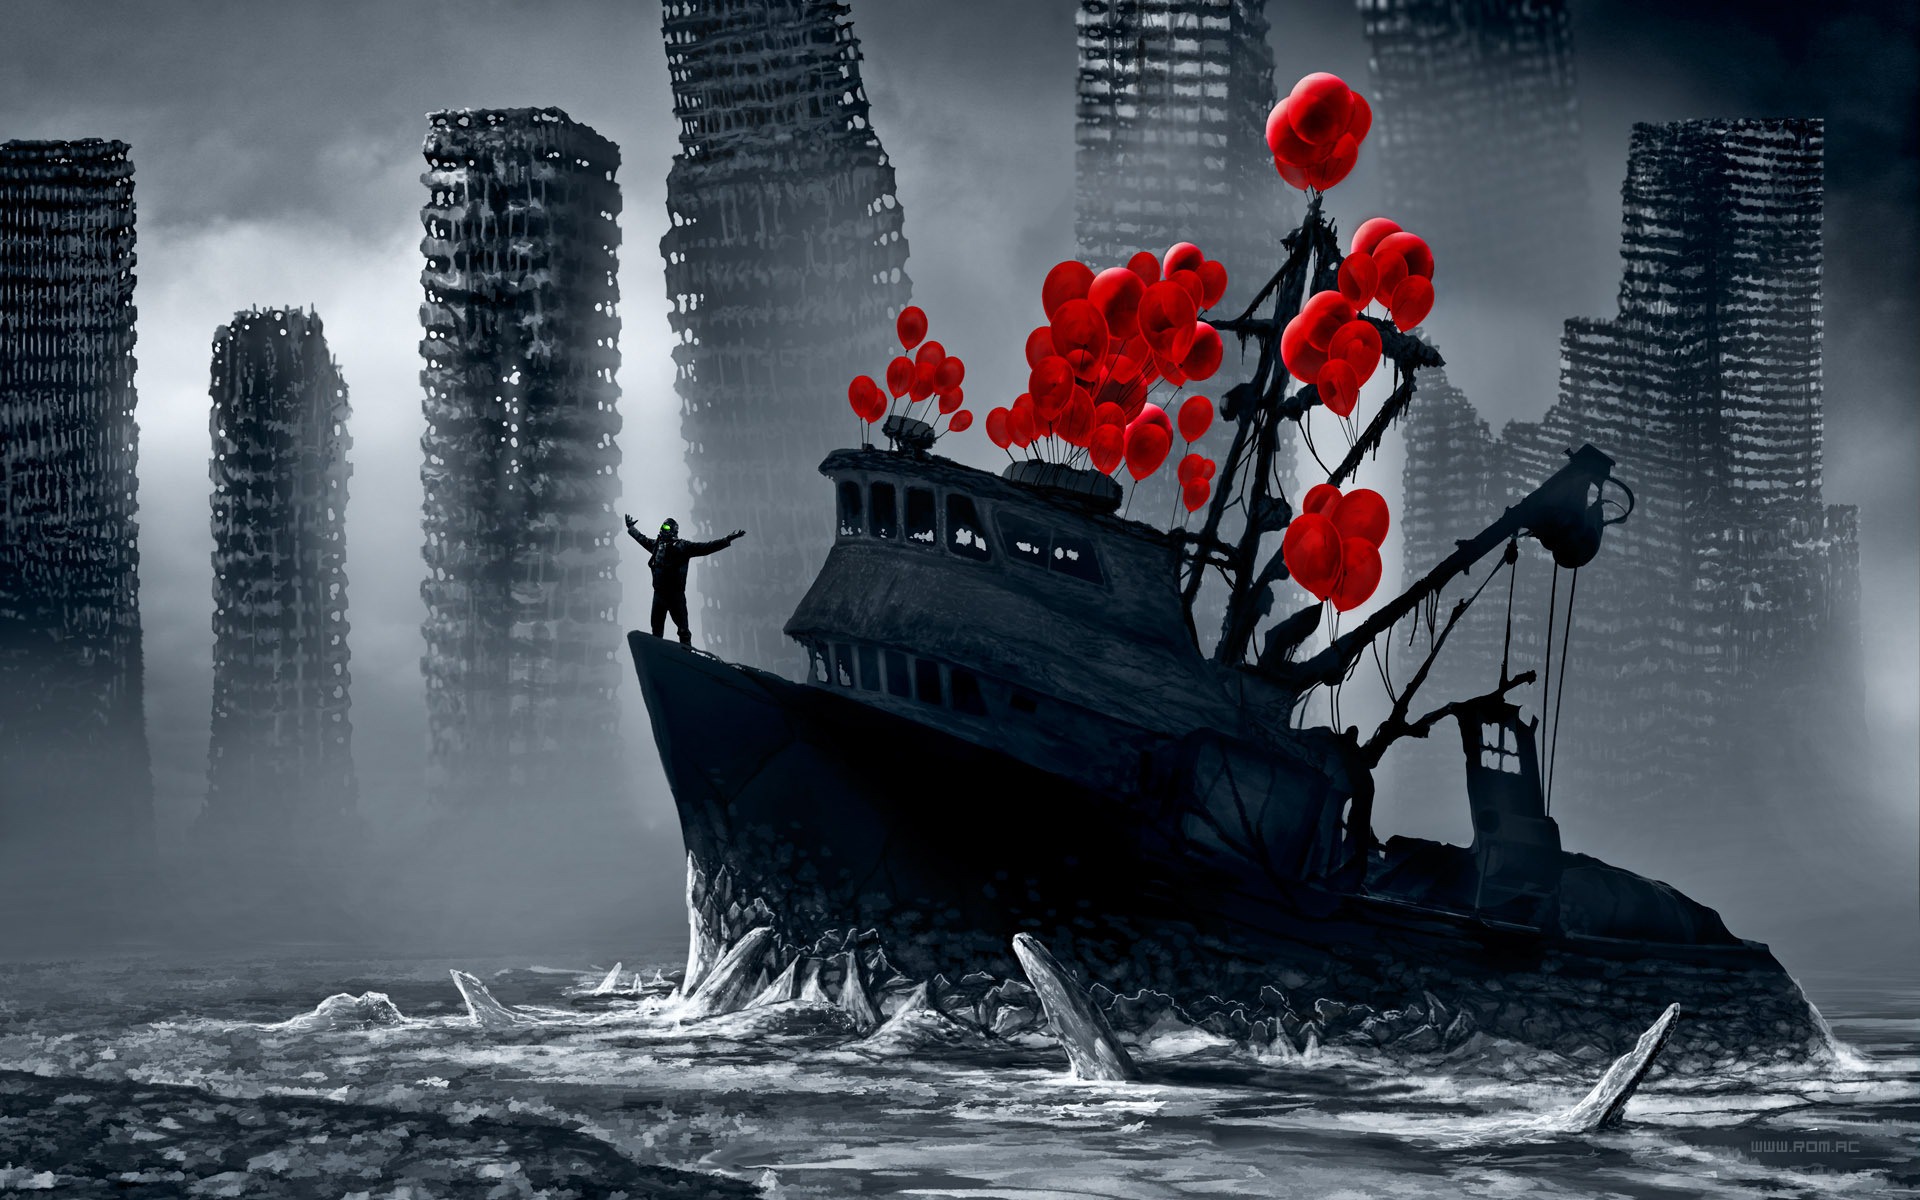 Romantically Apocalyptic creative painting wallpapers (2) #19 - 1920x1200